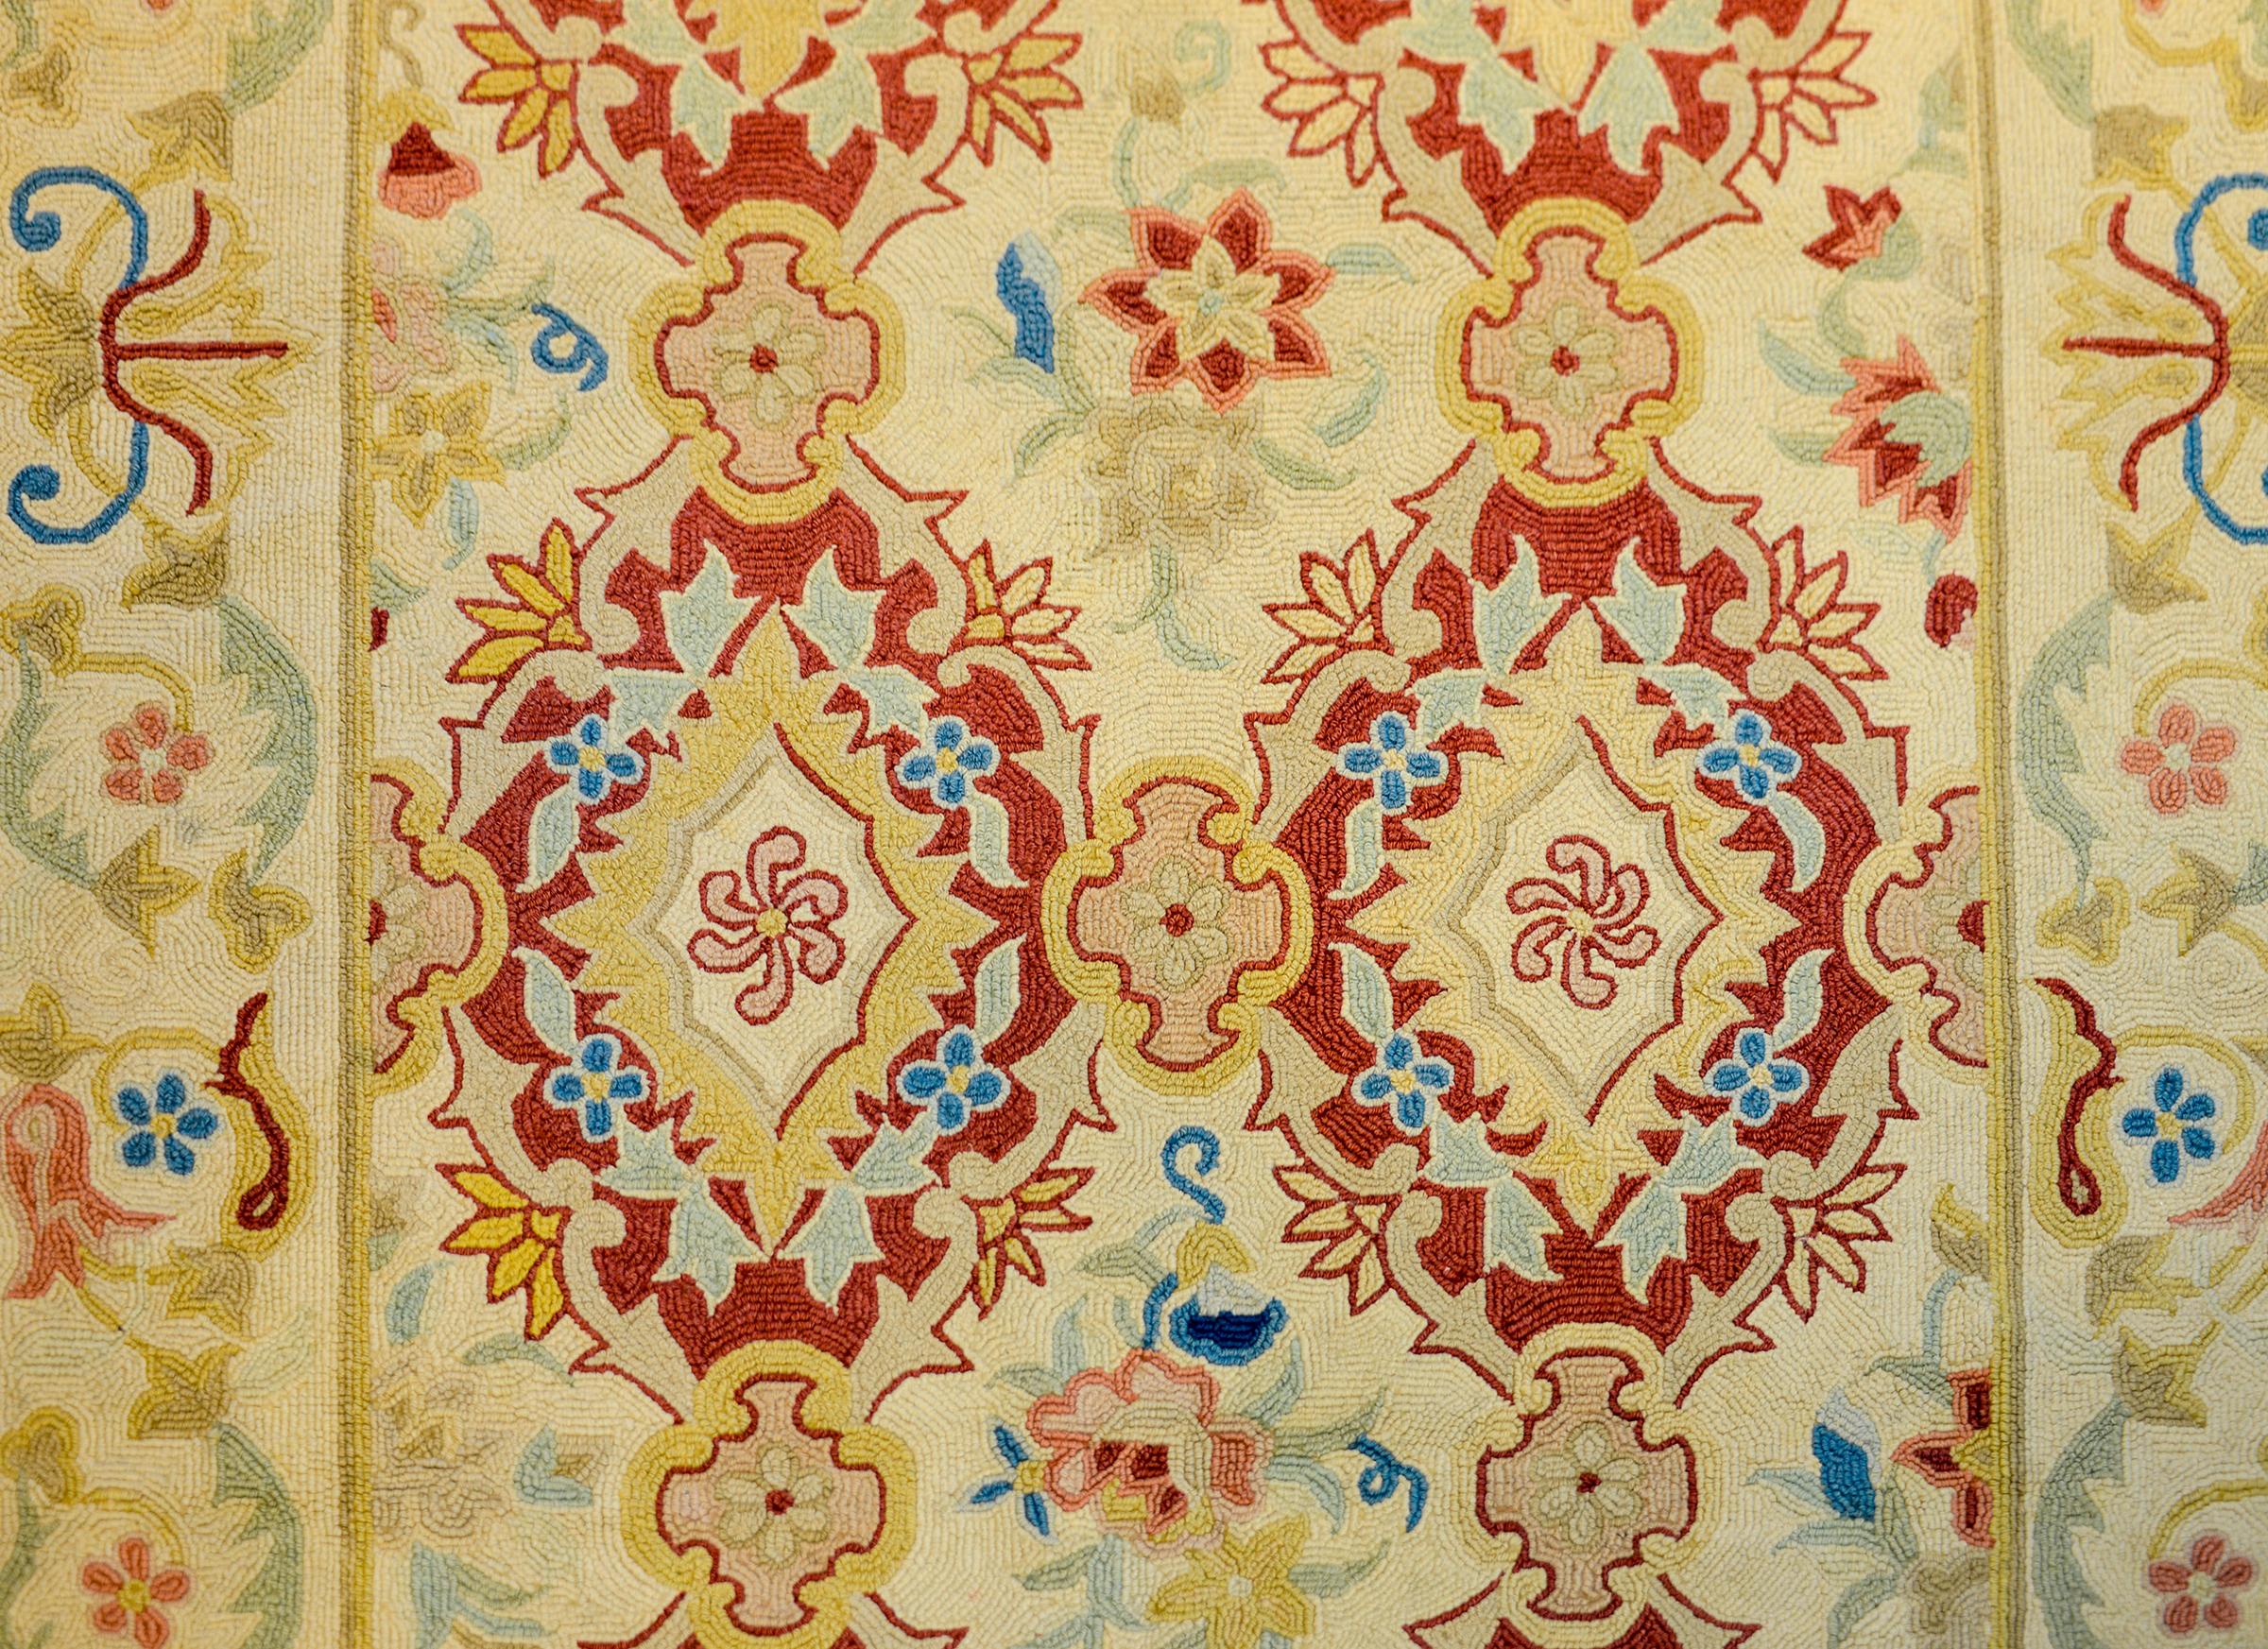 20th century Folk Art hook rug with several crimson floral medallions with stylized flowers woven in indigo, gold, cream, pink, and green on a cream colored ground. The border is similarly patterned with scrolling vines and flowers.